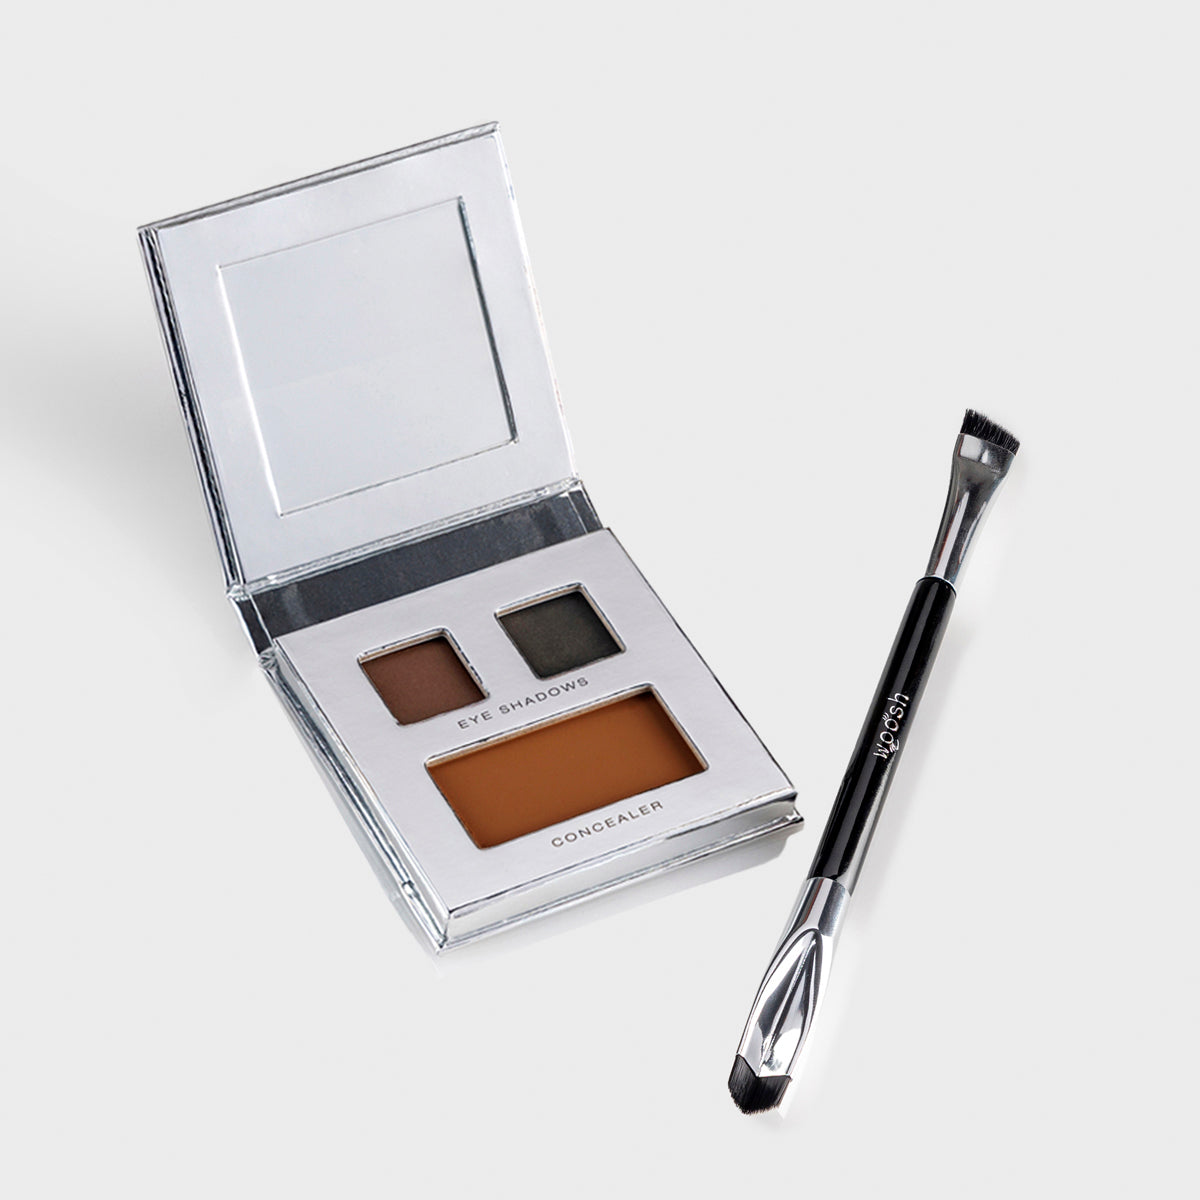 Smokey Eye Palette with two eyeshadows and one hazelnut concealer with the Corner Brush